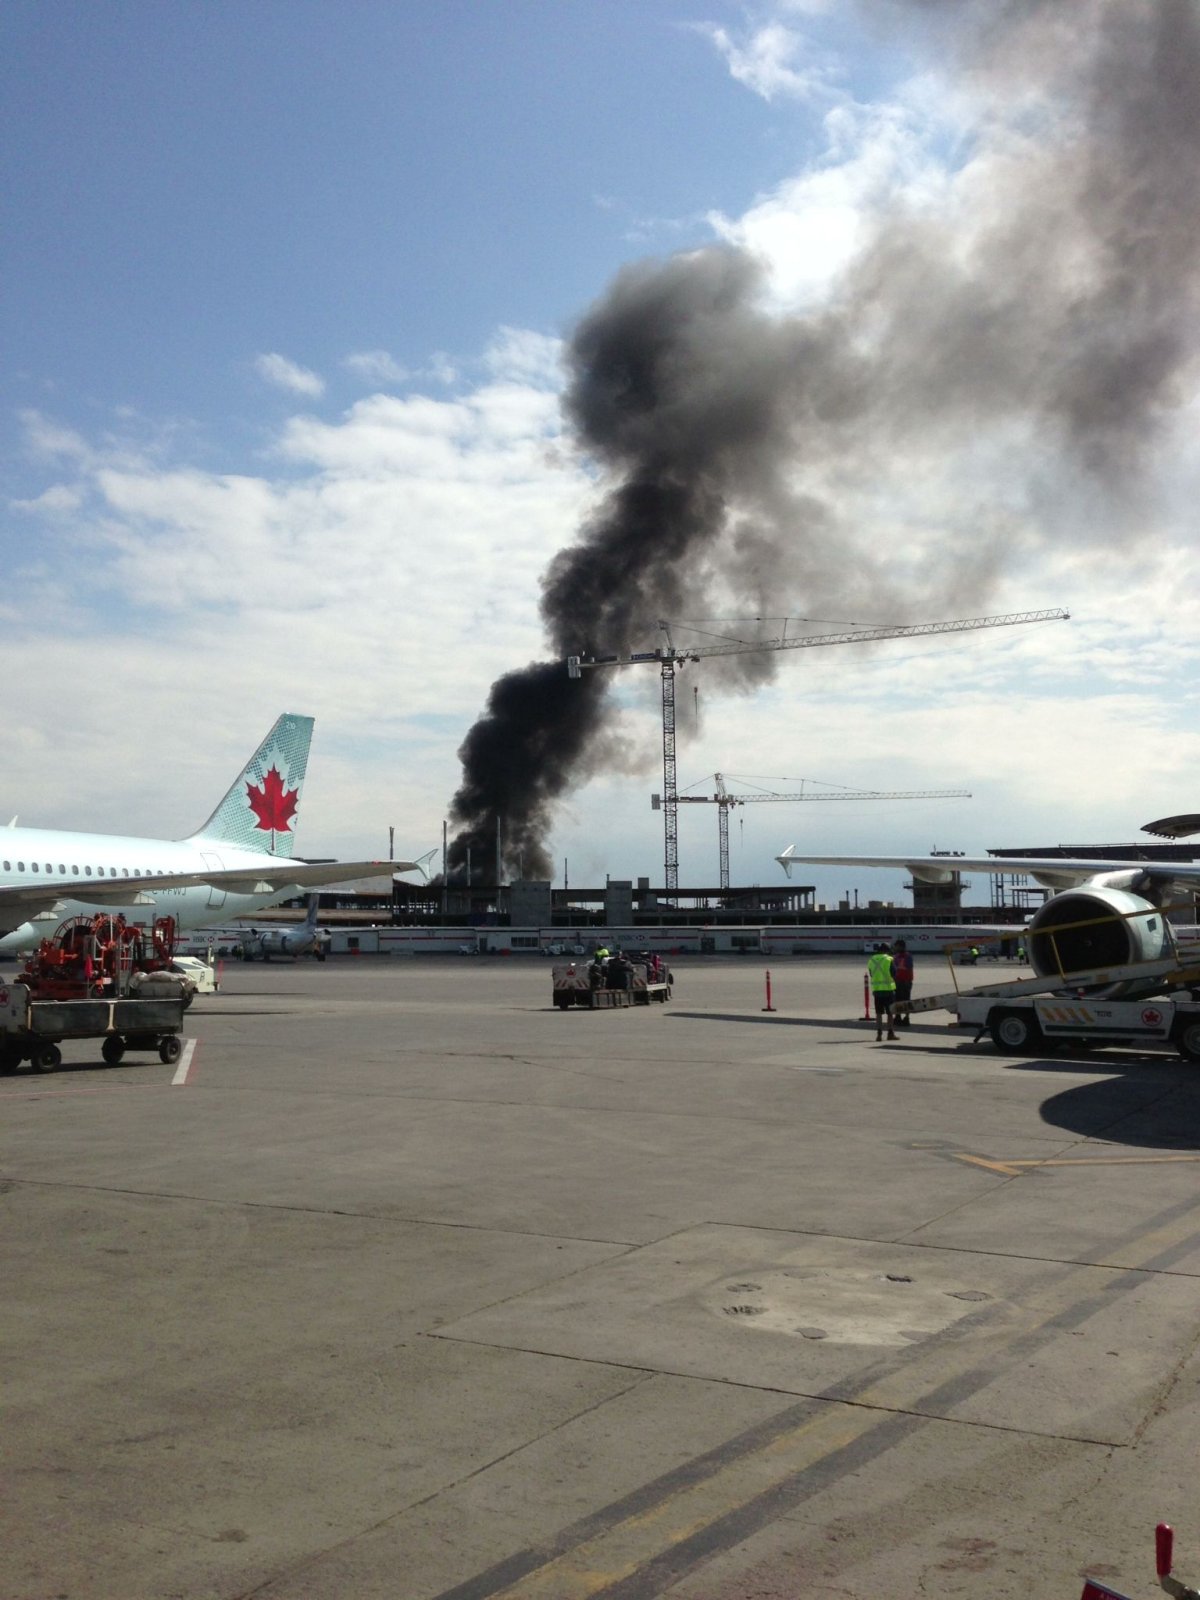 A fire broke out near the Calgary Airport.